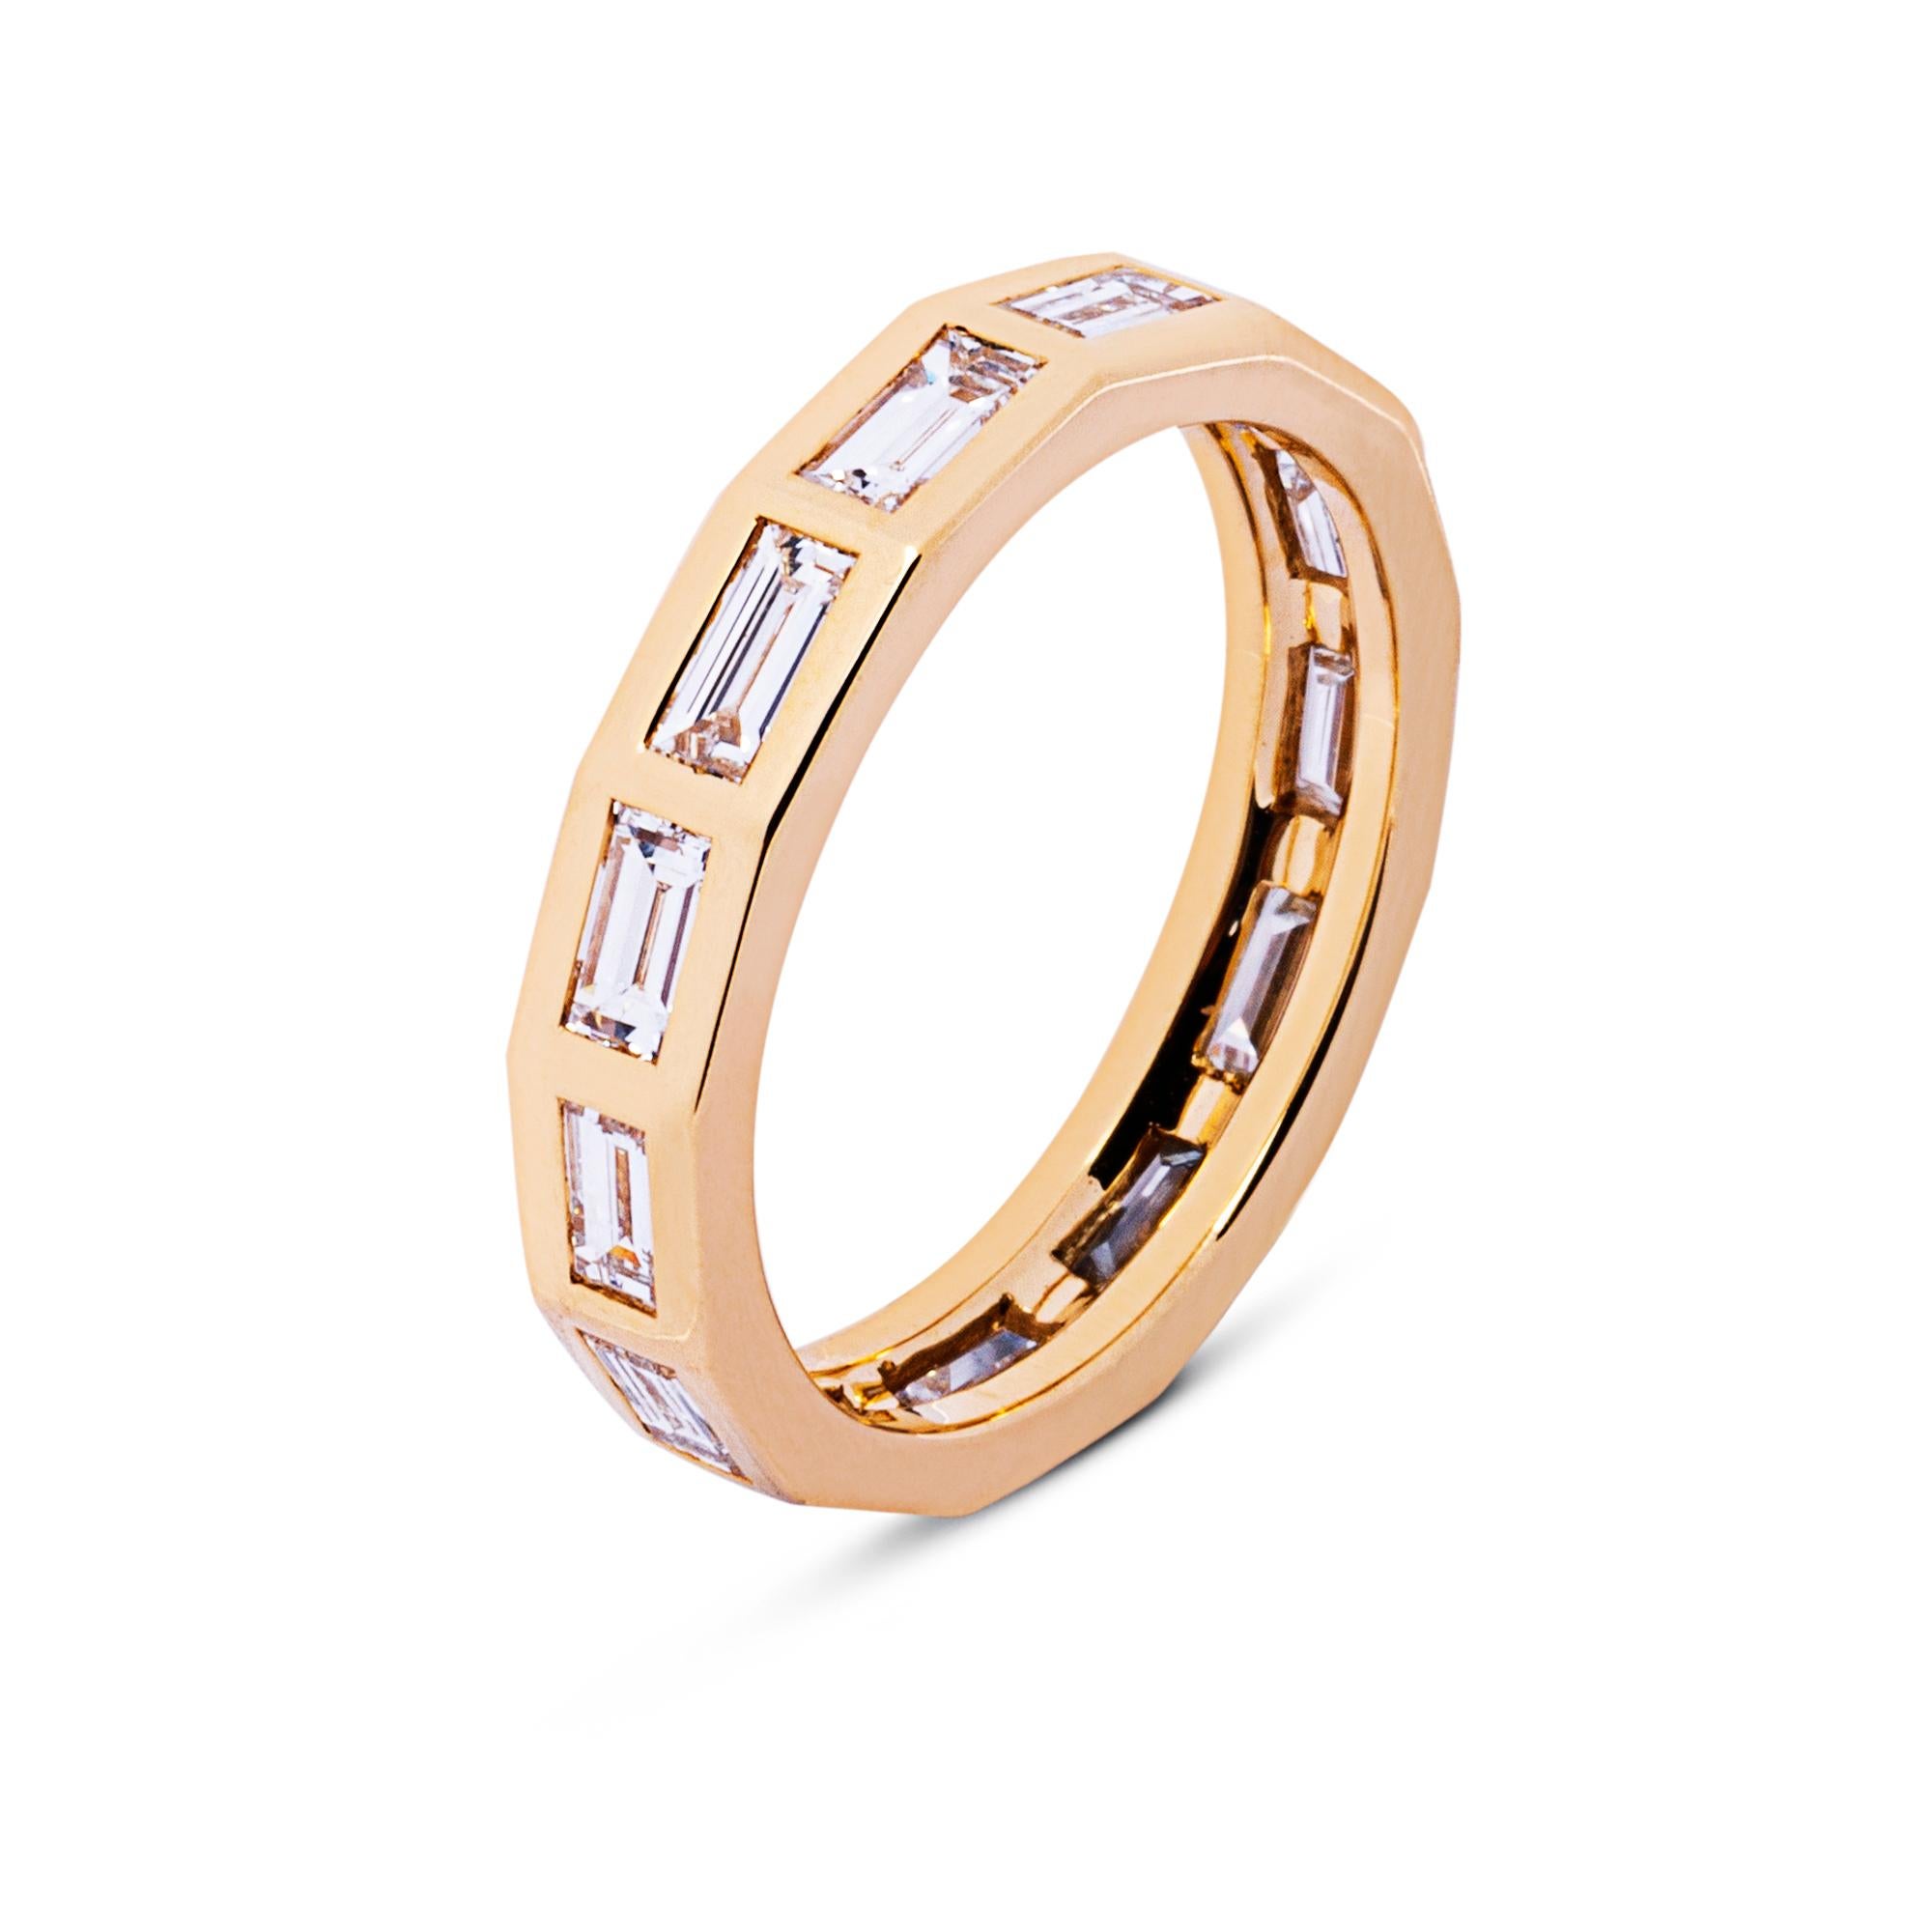 Alex Jona design collection, hand crafted in Italy, 18 karat yellow gold eternity band ring, showcasing 13 baguette cut white diamonds bezel-set weighing 1.80 total carats, E color, VVS1 clarity. Size 6.5, can be made to order in any size.